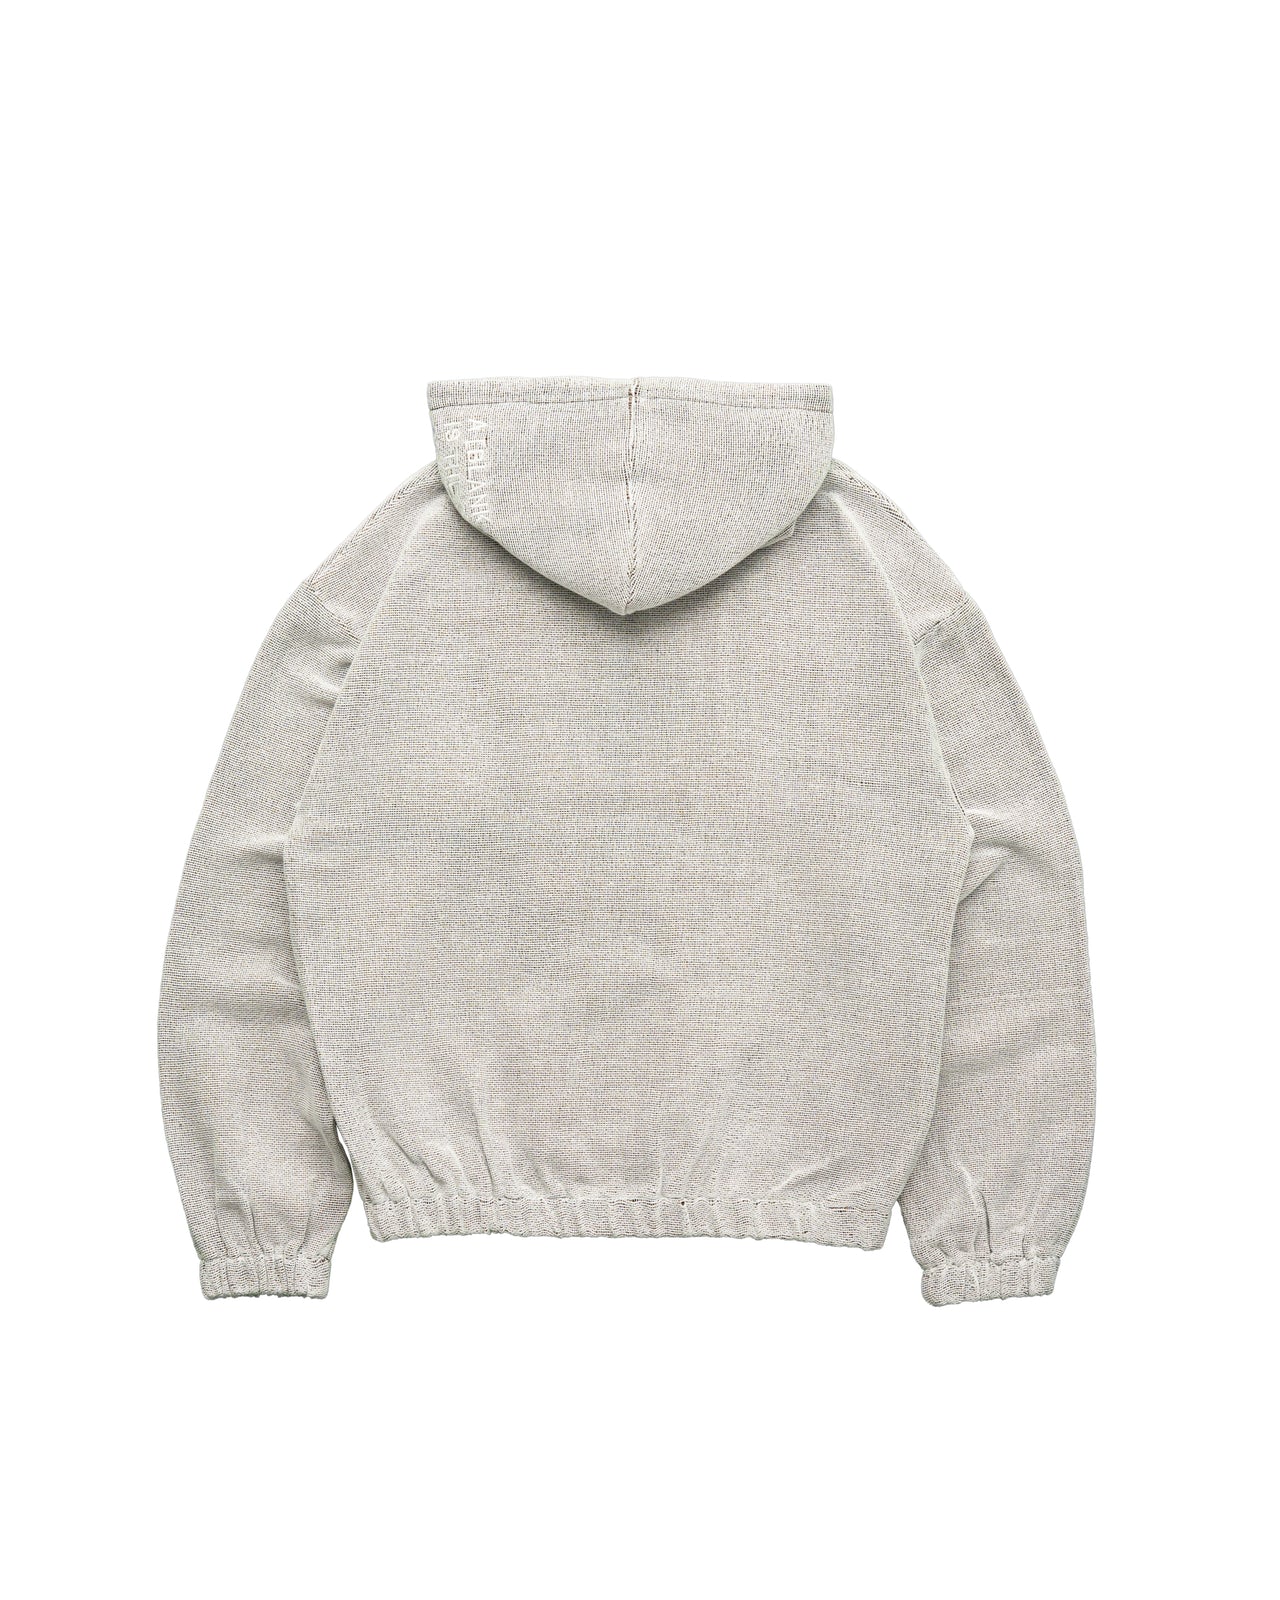 [BLANK CANVAS] Tapestry Hoodie White